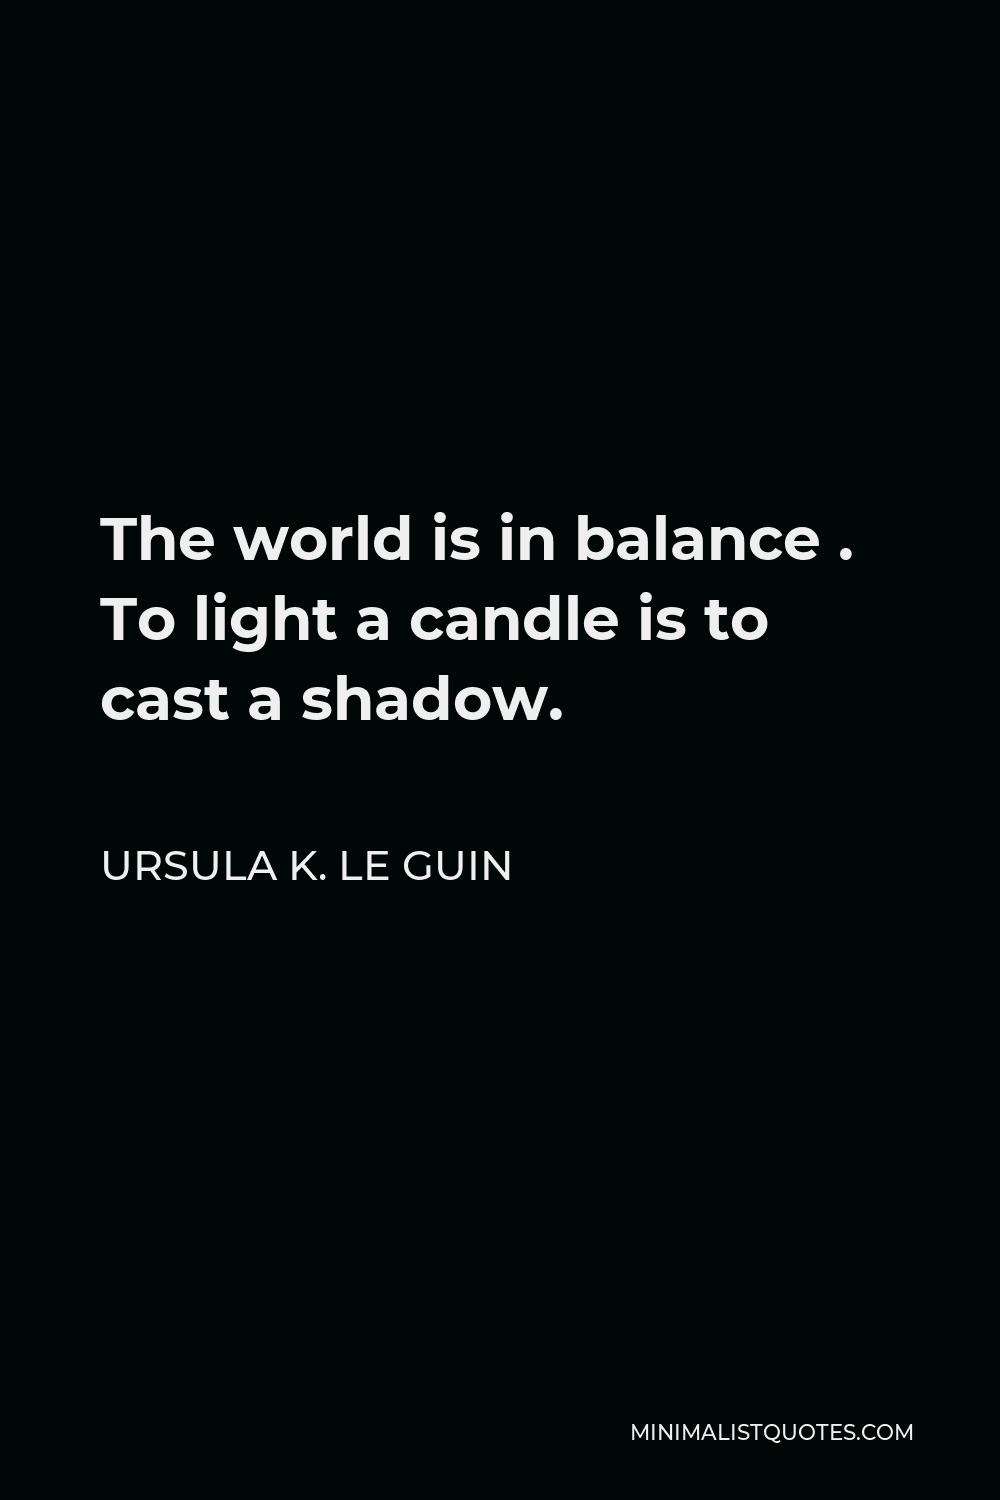 Ursula K. Le Guin Quote - The world is in balance . To light a candle is to cast a shadow.